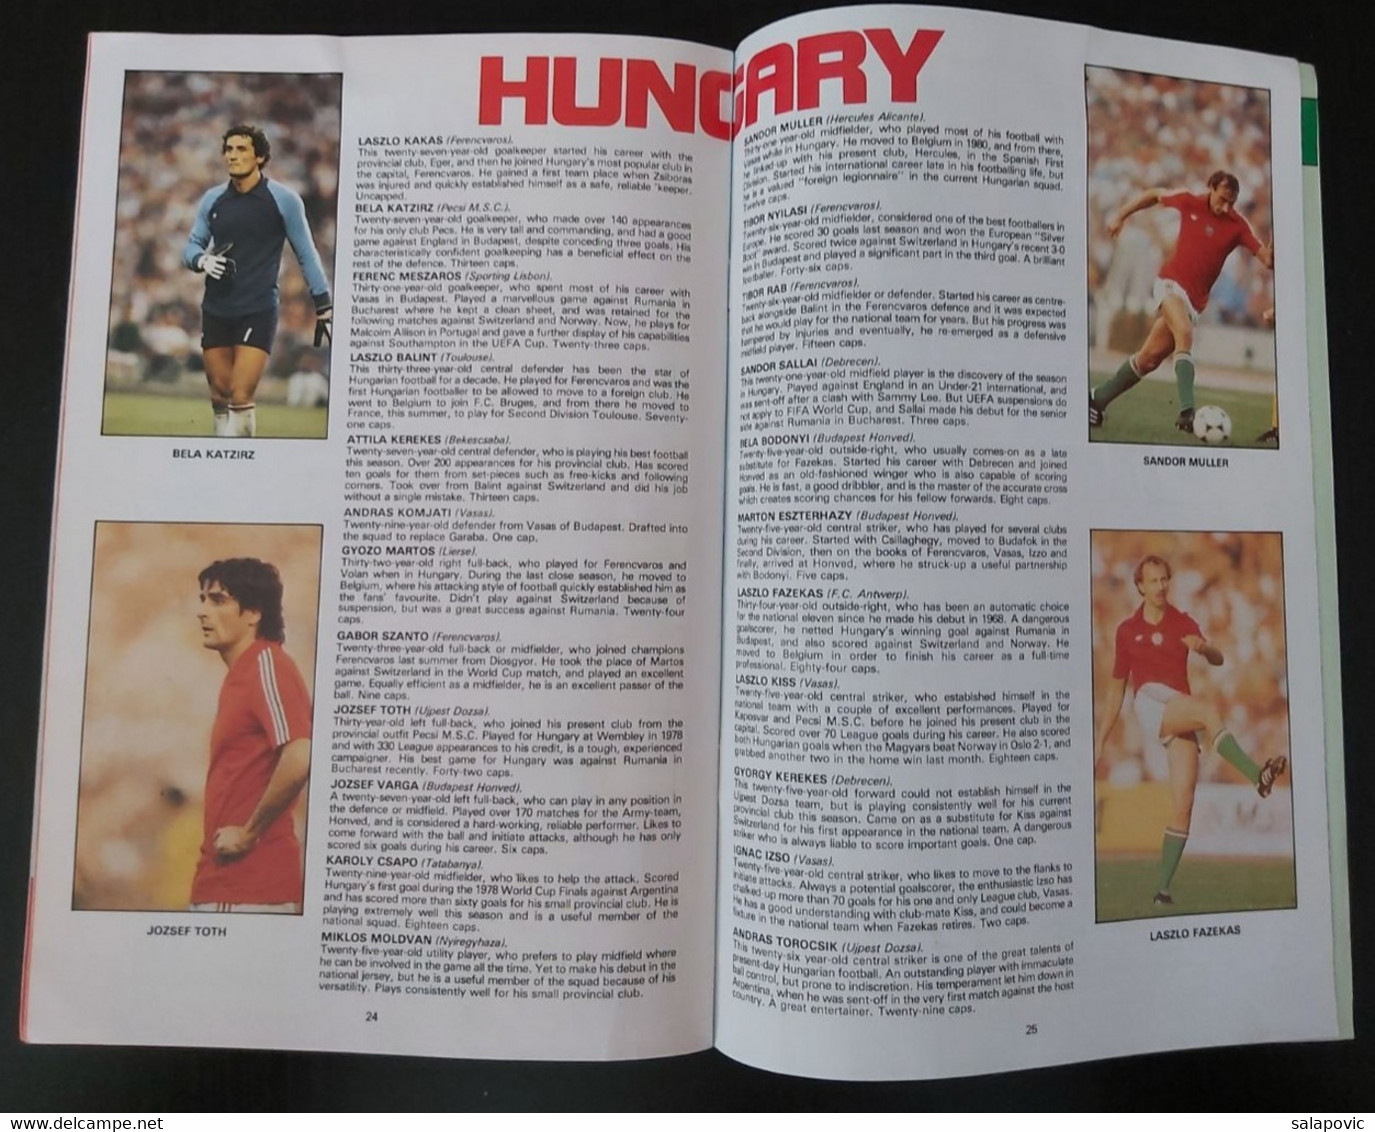 1981 ENGLAND V HUNGARY OFFICIAL MATCH PROGRAMME 18/11/1981 WORLD CUP QUALIFIER, FOOTBALL